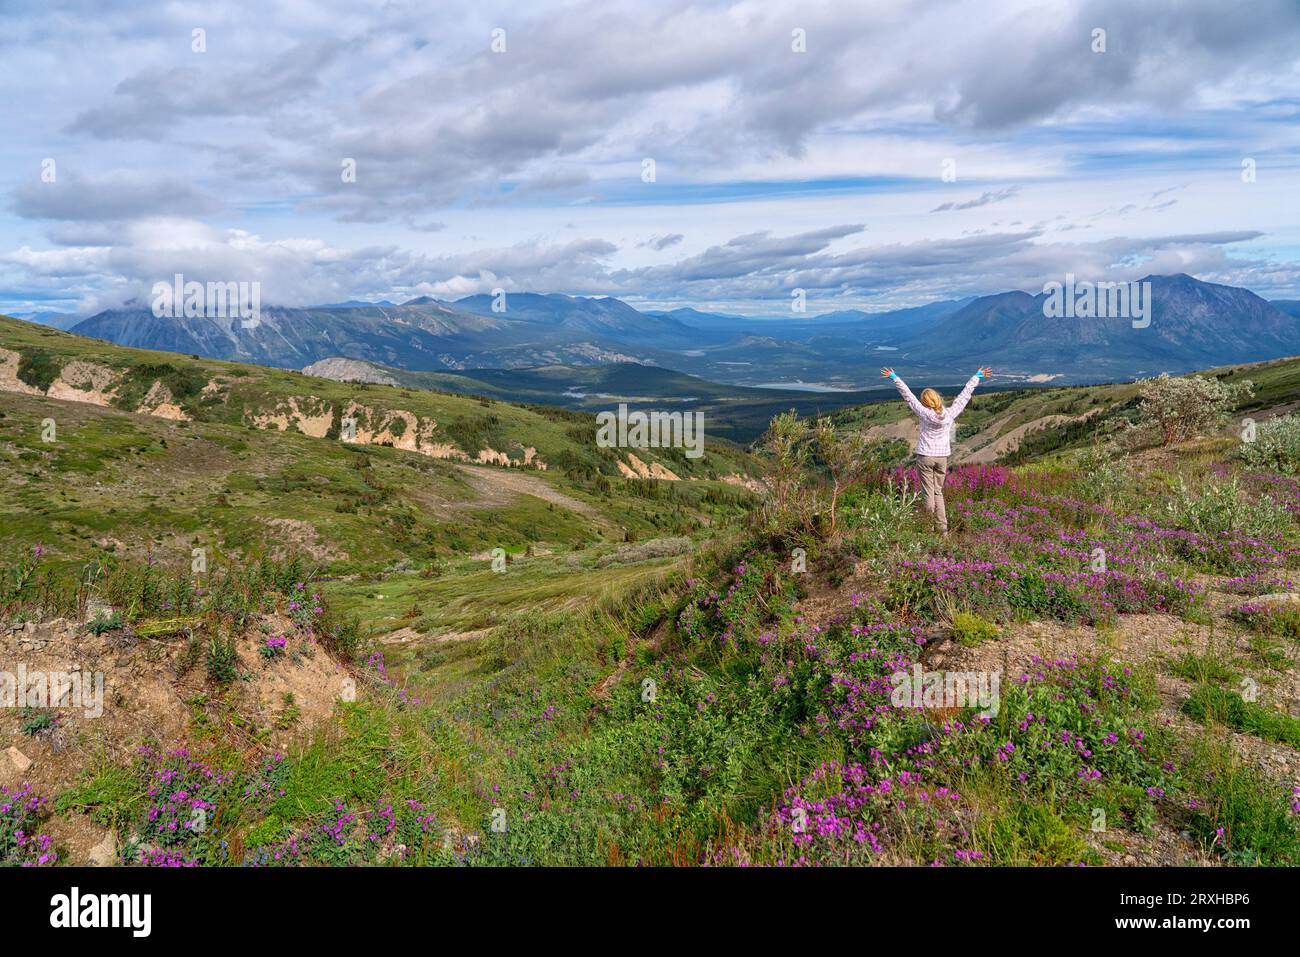 Back view of a person standing on Montana Mountain with her hands raised while looking over the beautiful vista, near Carcross, Yukon Territory Stock Photo